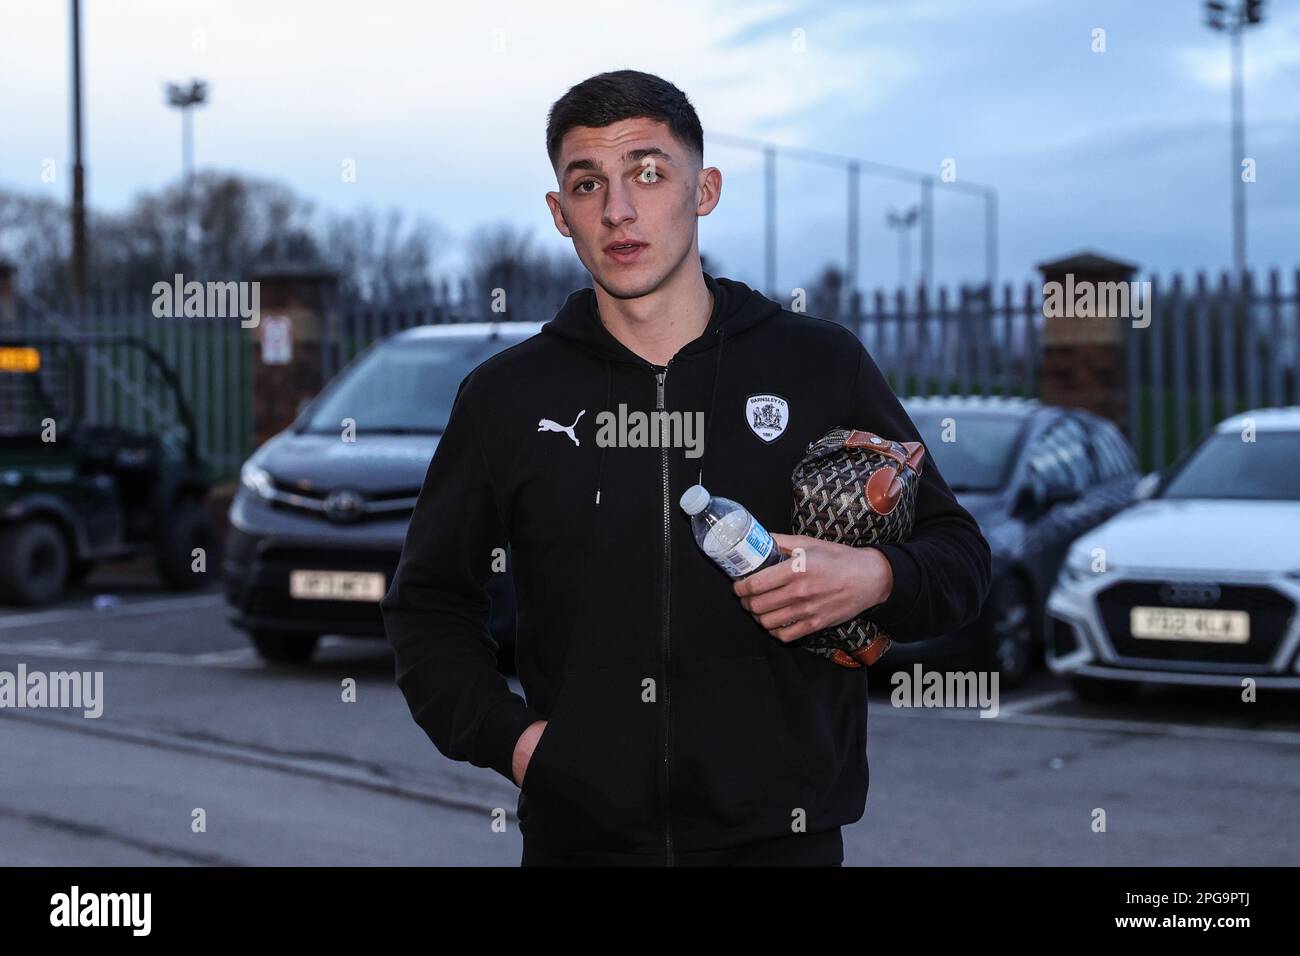 Bobby Thomas #12 of Barnsley arrives during the Sky Bet League 1 match Barnsley vs Sheffield Wednesday at Oakwell, Barnsley, United Kingdom, 21st March 2023  (Photo by Mark Cosgrove/News Images) Stock Photo